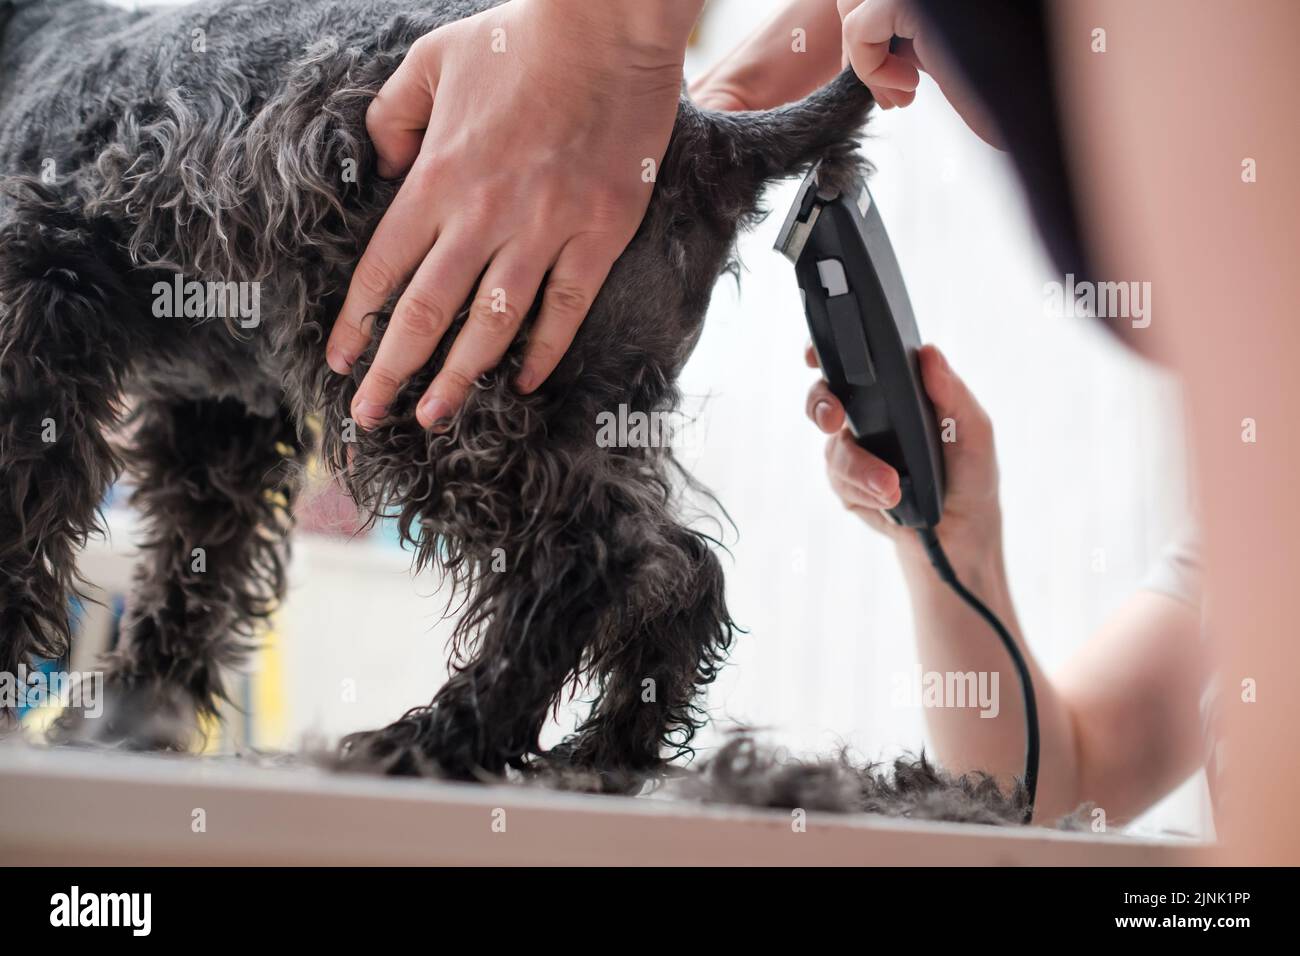 Shaving dogs at home. Groomer cutting fur of small black schnauzer Stock Photo